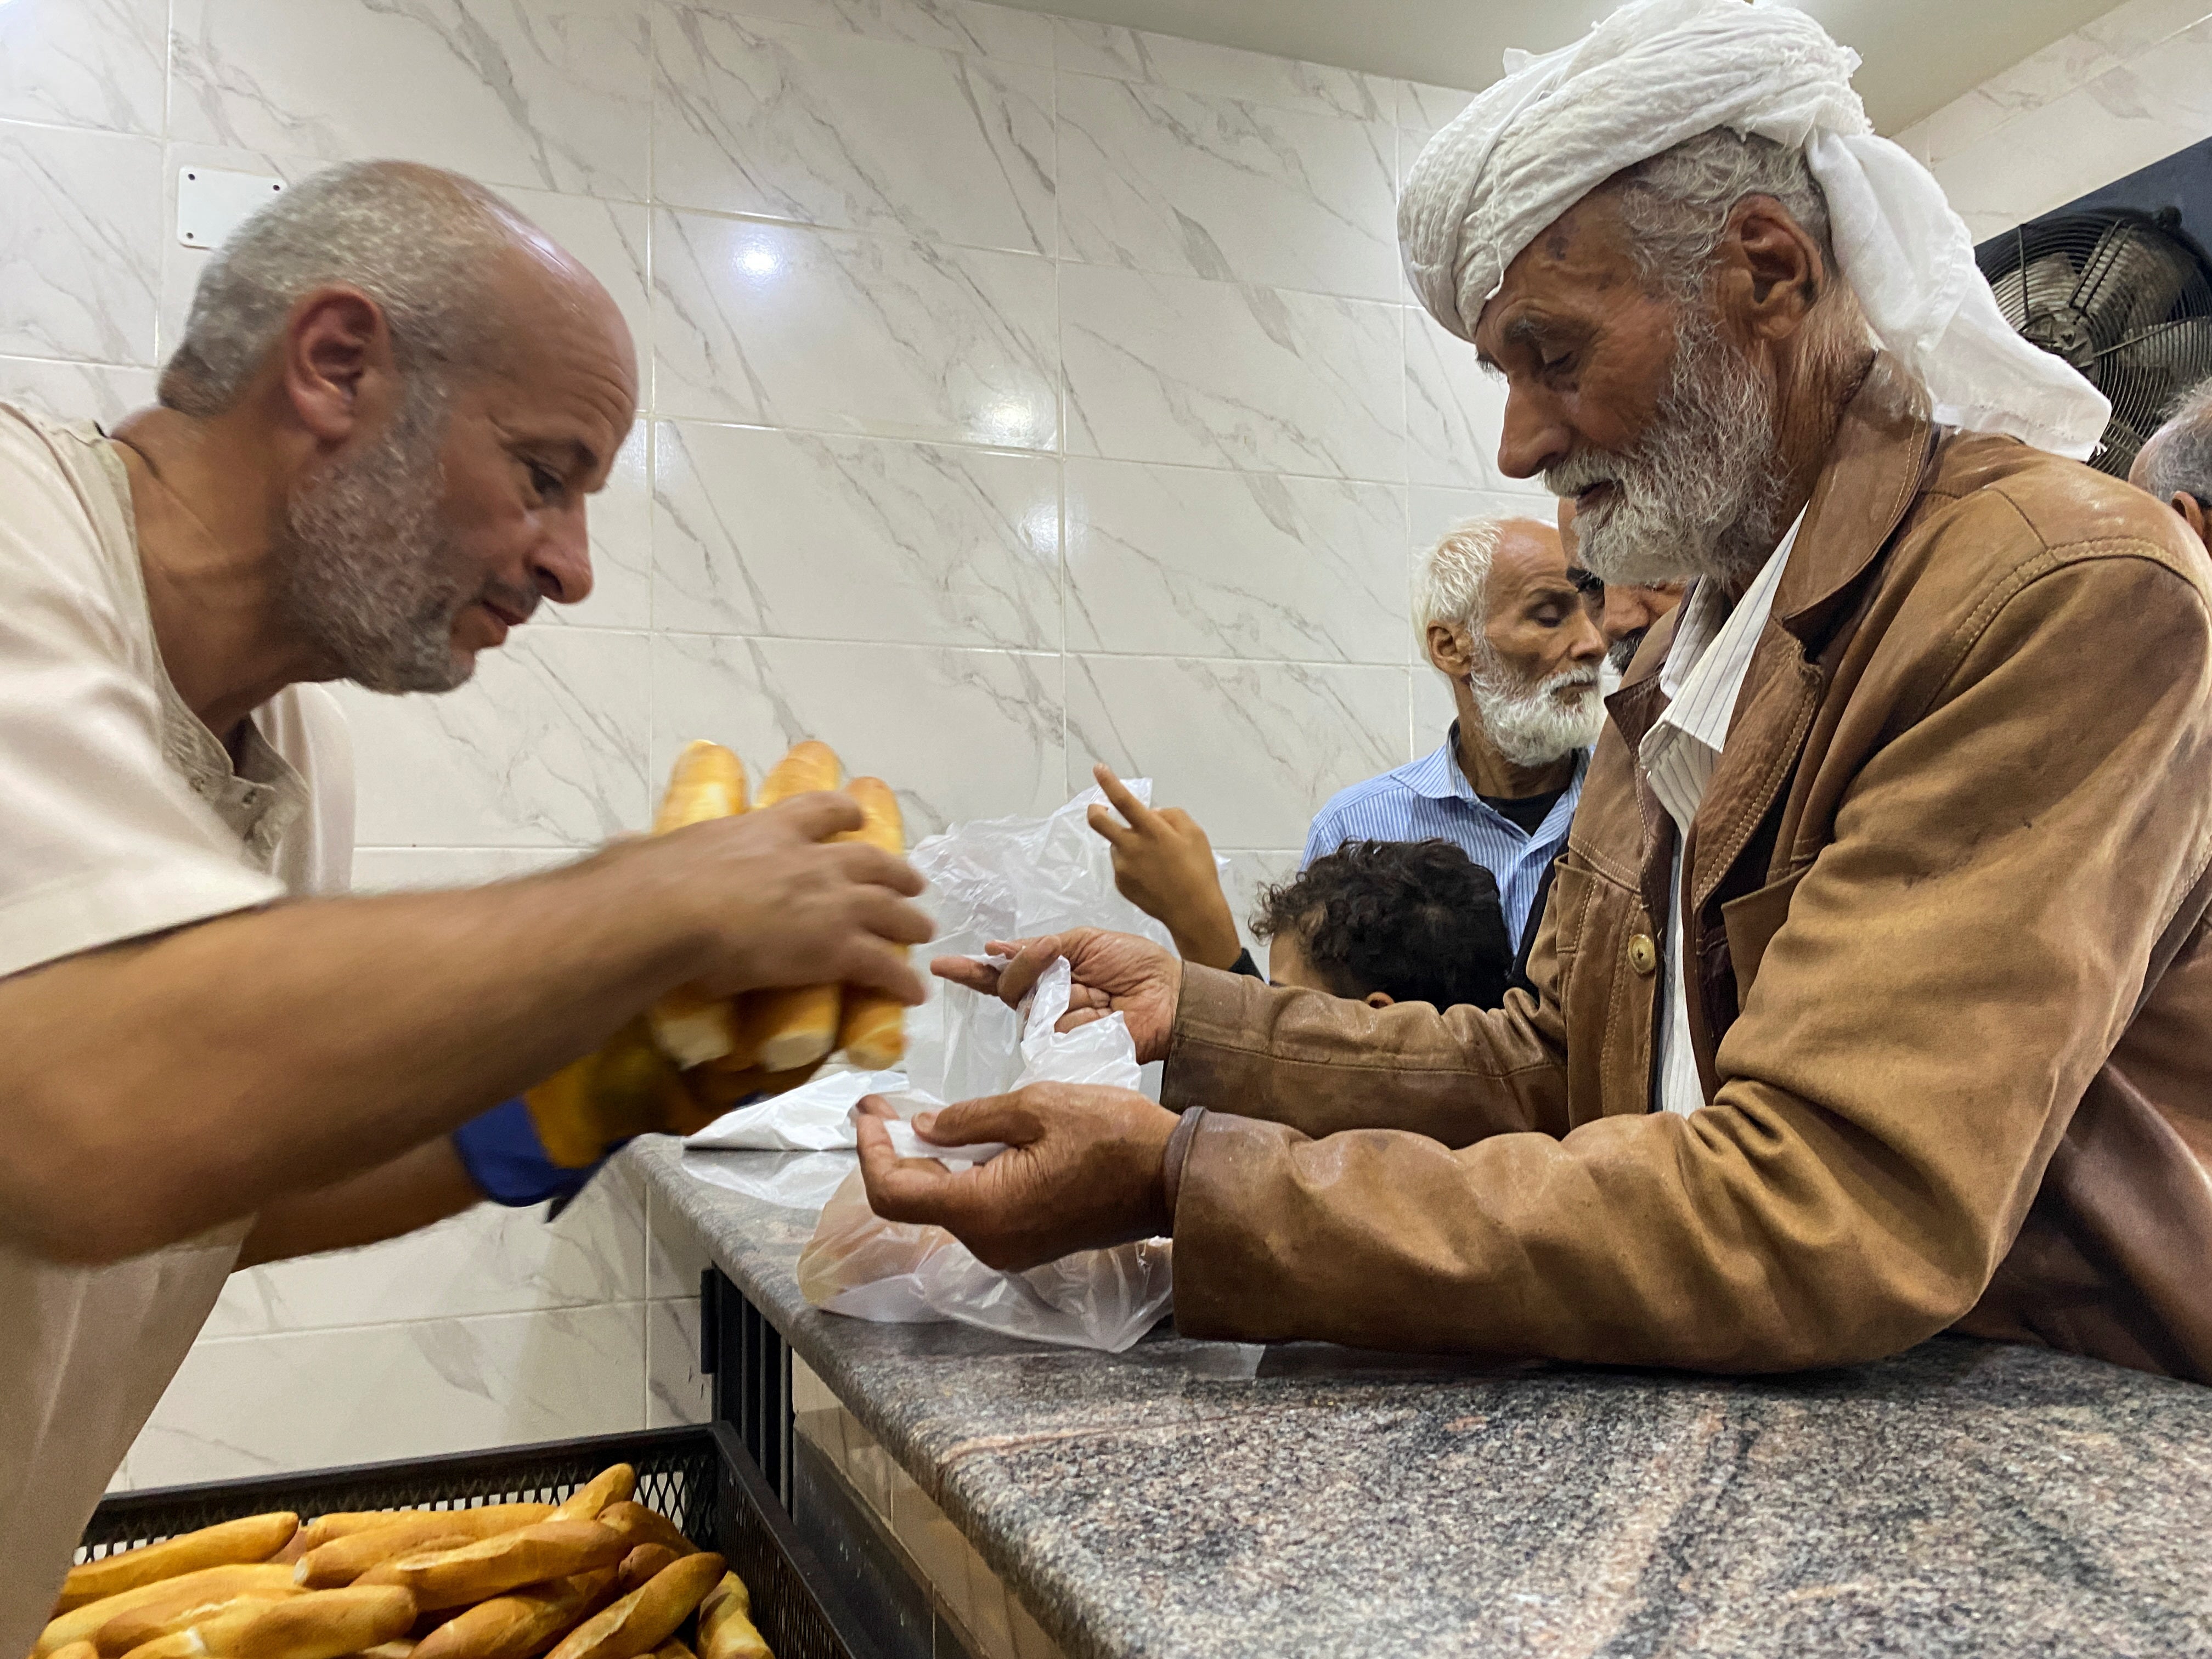 People get bread from a bakery, in the aftermath of the floods in Derna